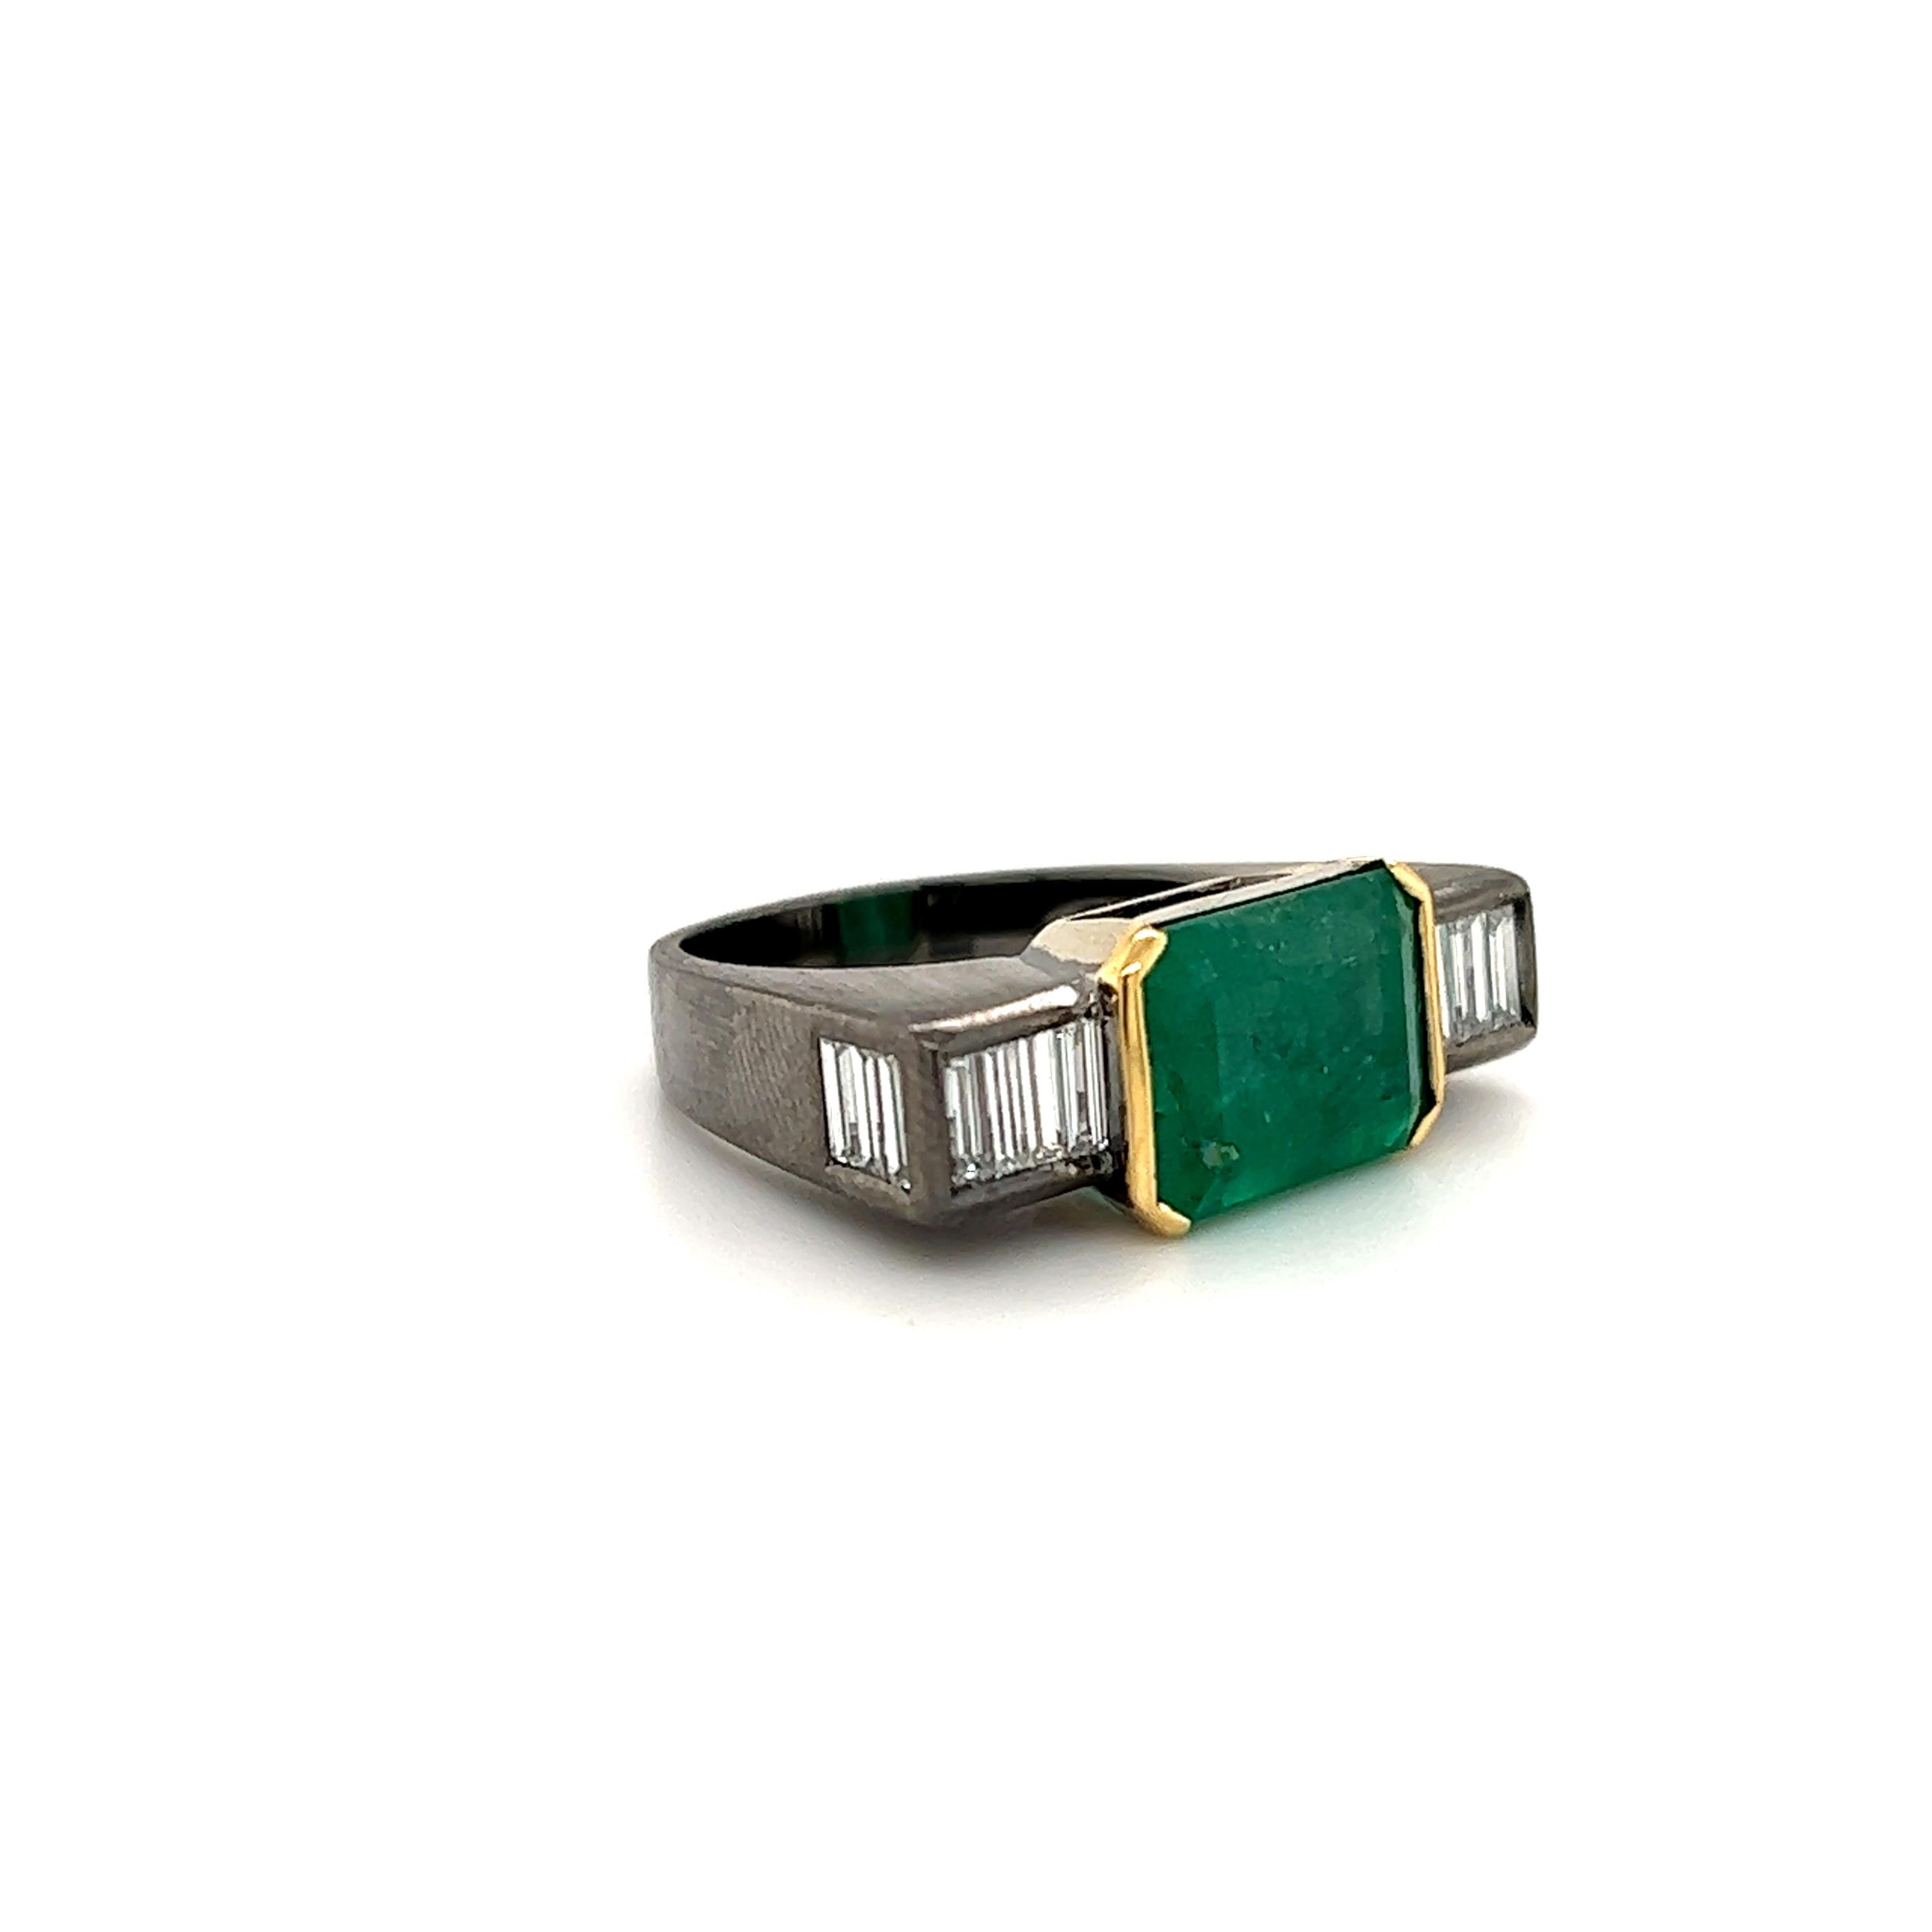 Fantastic design seen on this one of a kind ring. The ring is highlighted with one east/west set emerald gemstone that measures 12 x 8.5 mm and weighs  approximately 4.75 ct.  This ring is truly unique, as sharp edges create this geometric design. 